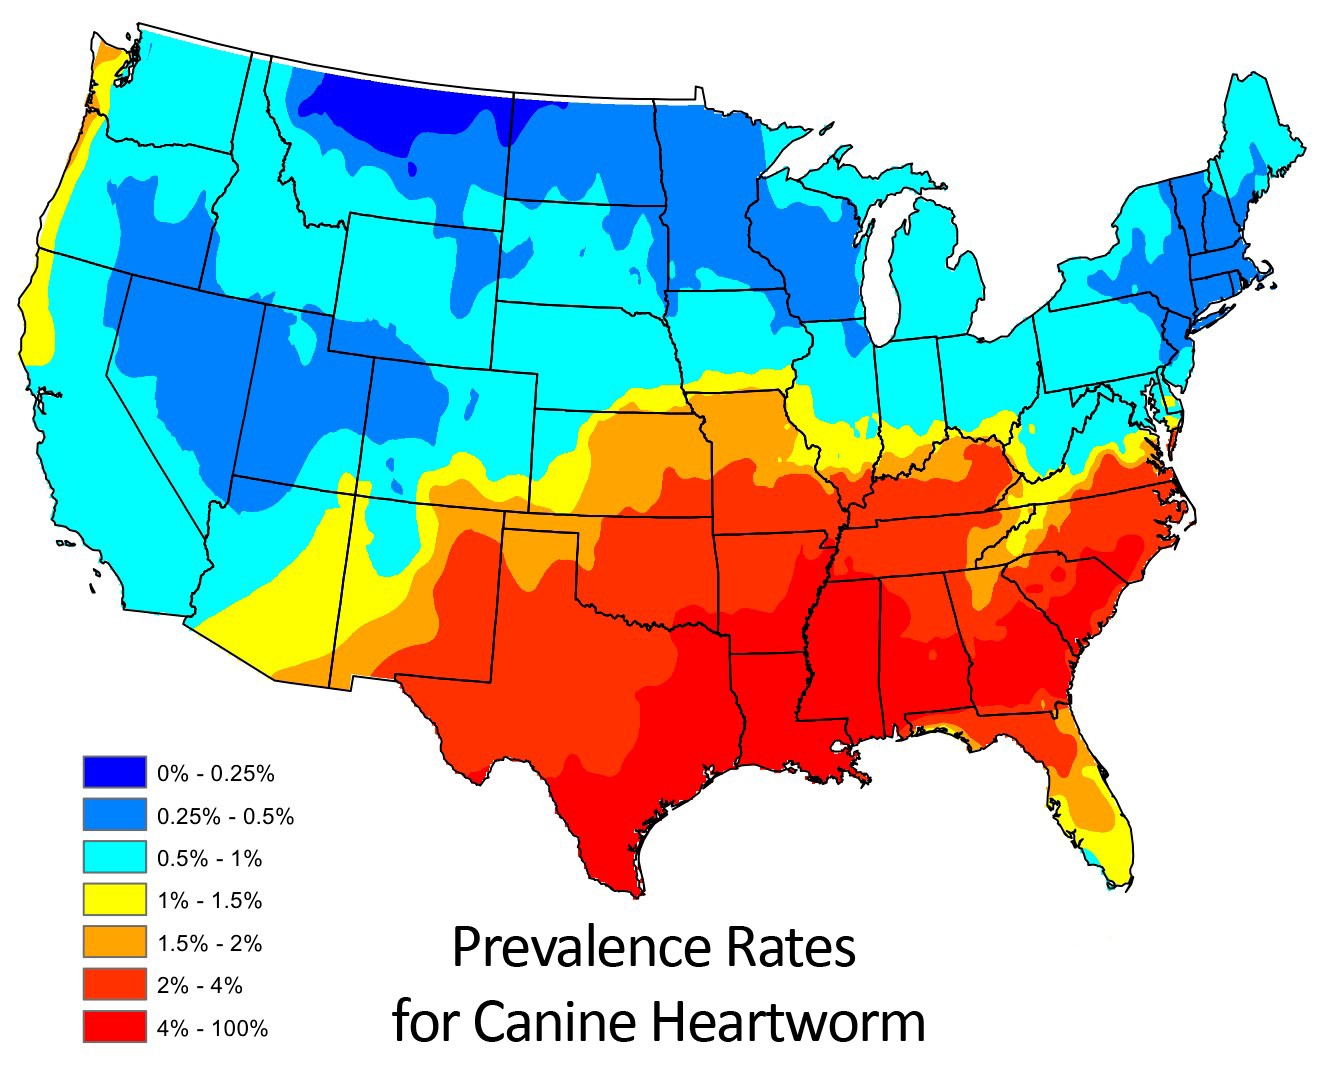 Canine Heartworm Prevalence Rates